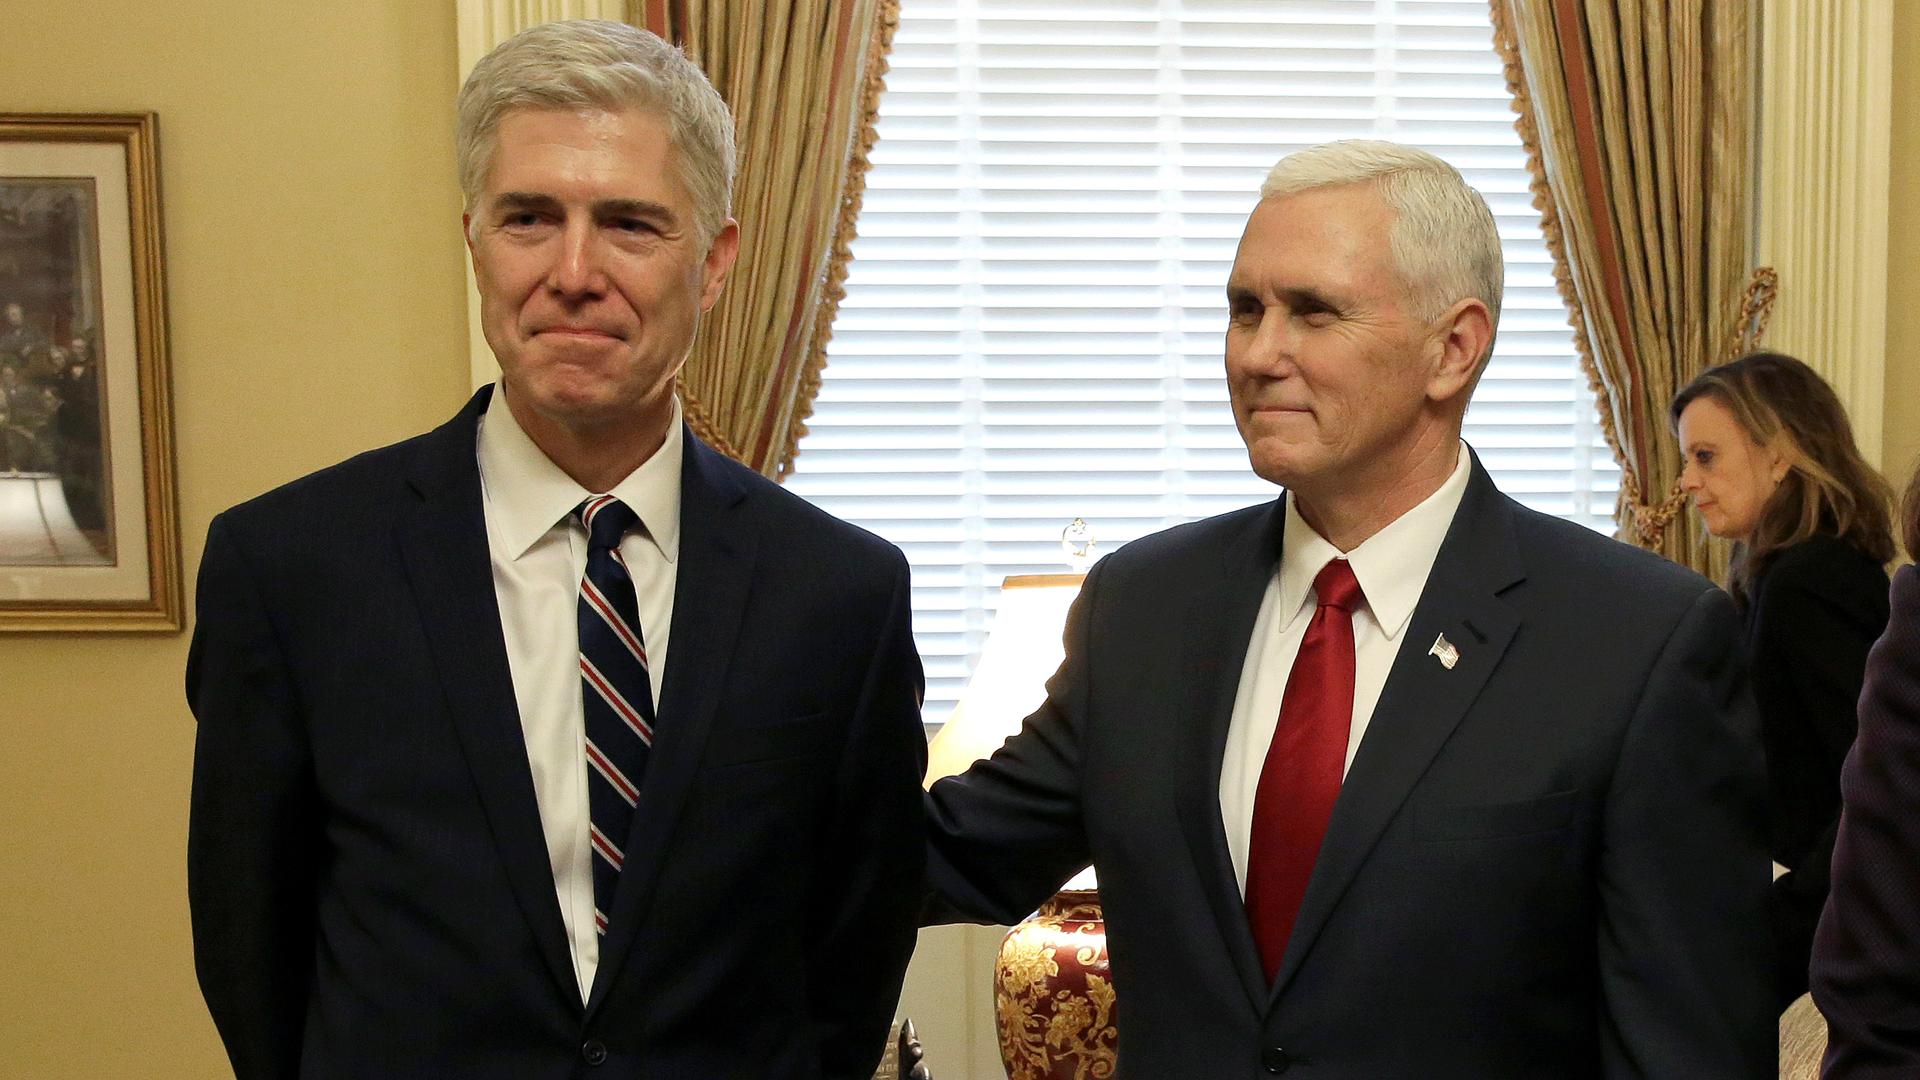 Supreme Court nominee Judge Neil Gorsuch stands with Vice President Mike Pence on Capitol Hill in Washington, DC, Feb. 1, 2017. 